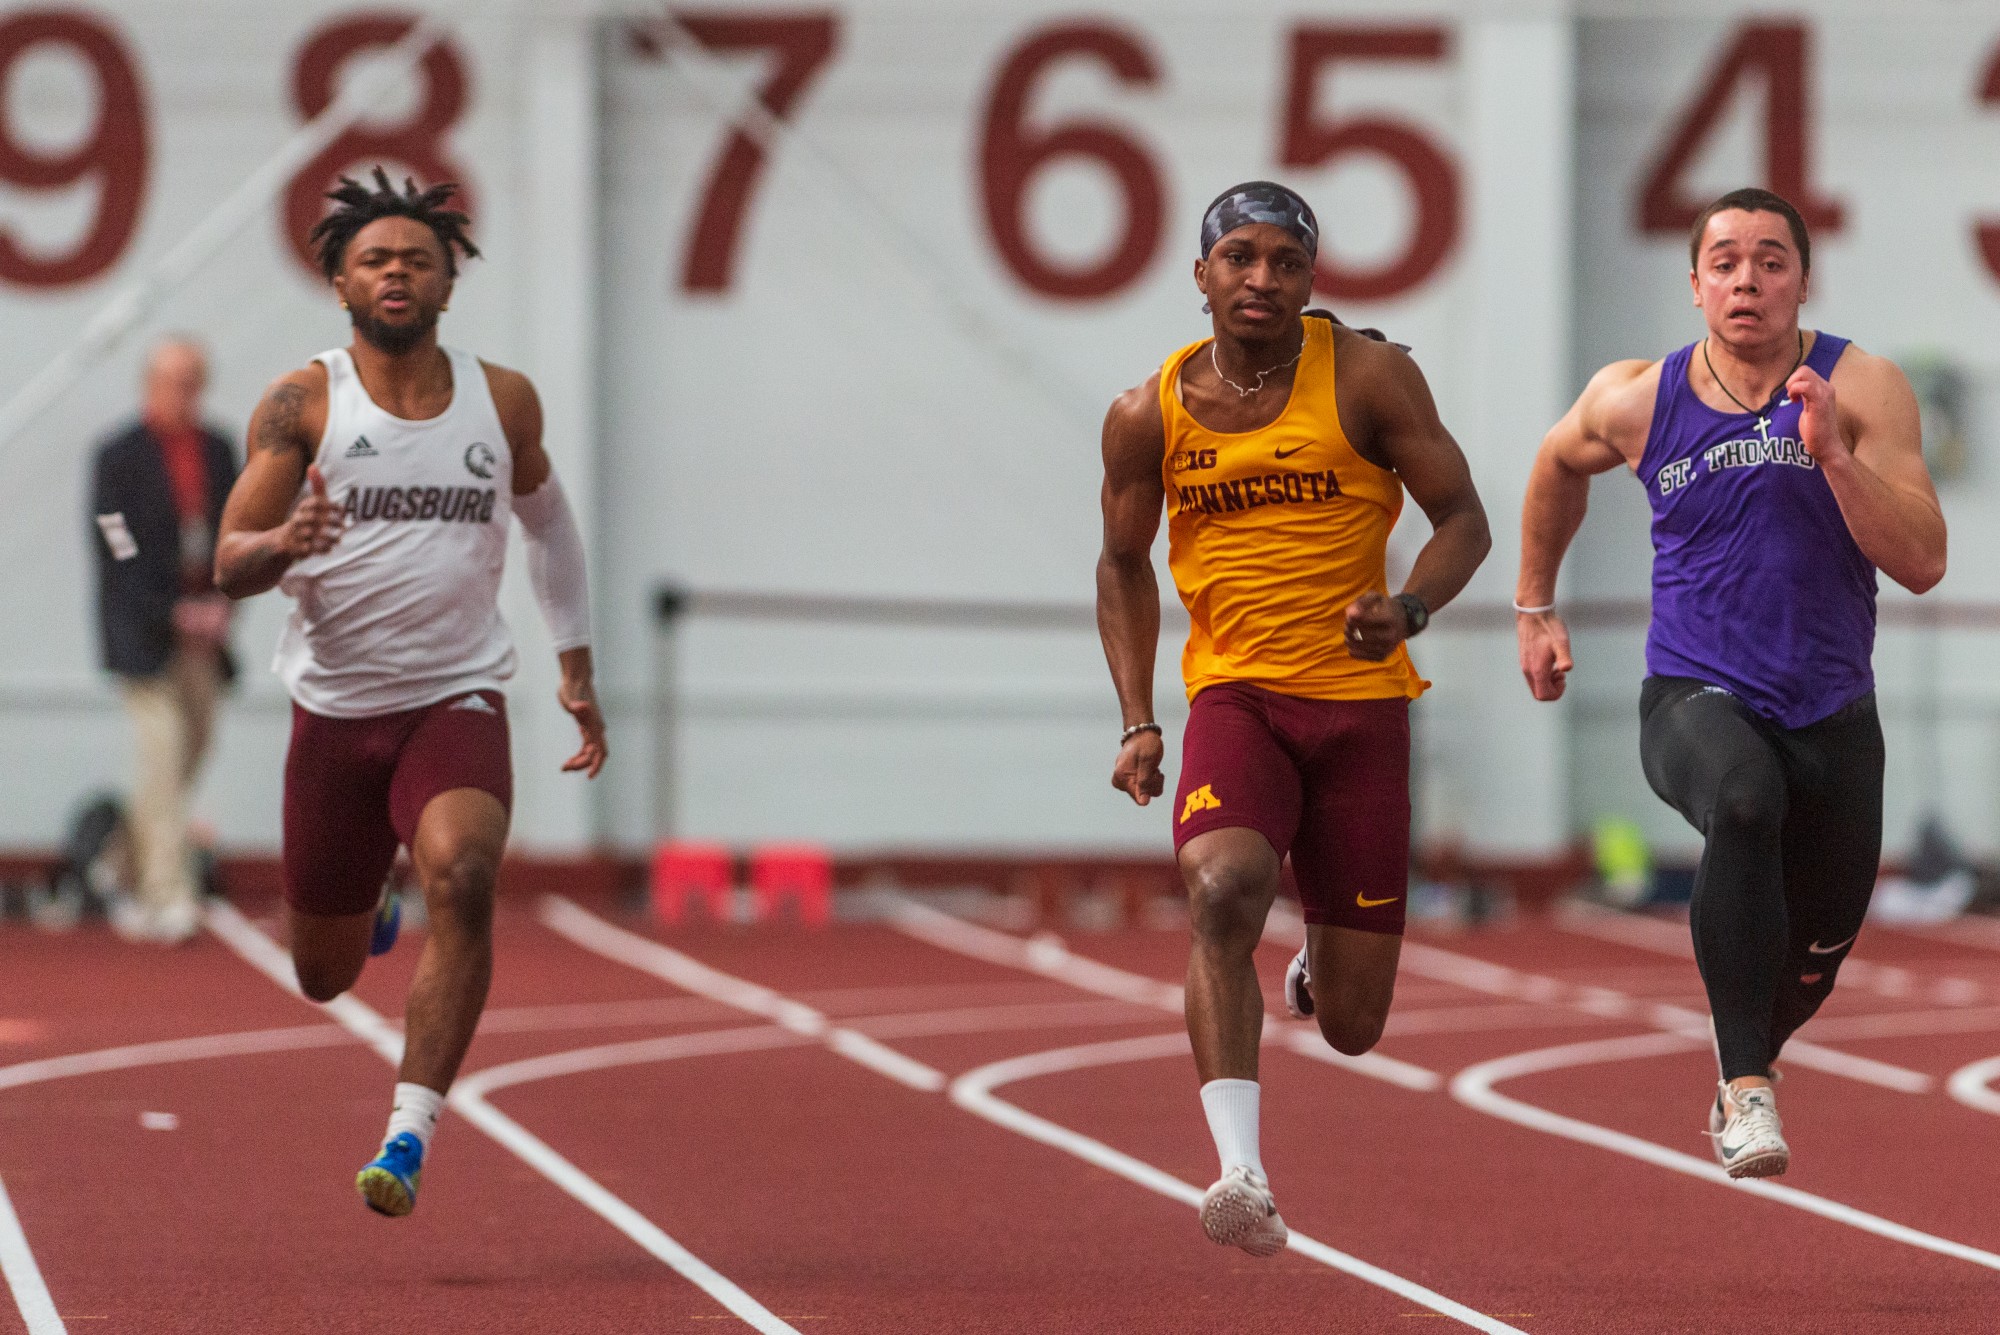 Gophers Freshman Kion Benjamin competes in the sixty meter dash at the Minnesota Cold Classic at the University of Minnesota Fieldhouse on Friday, Feb. 21.